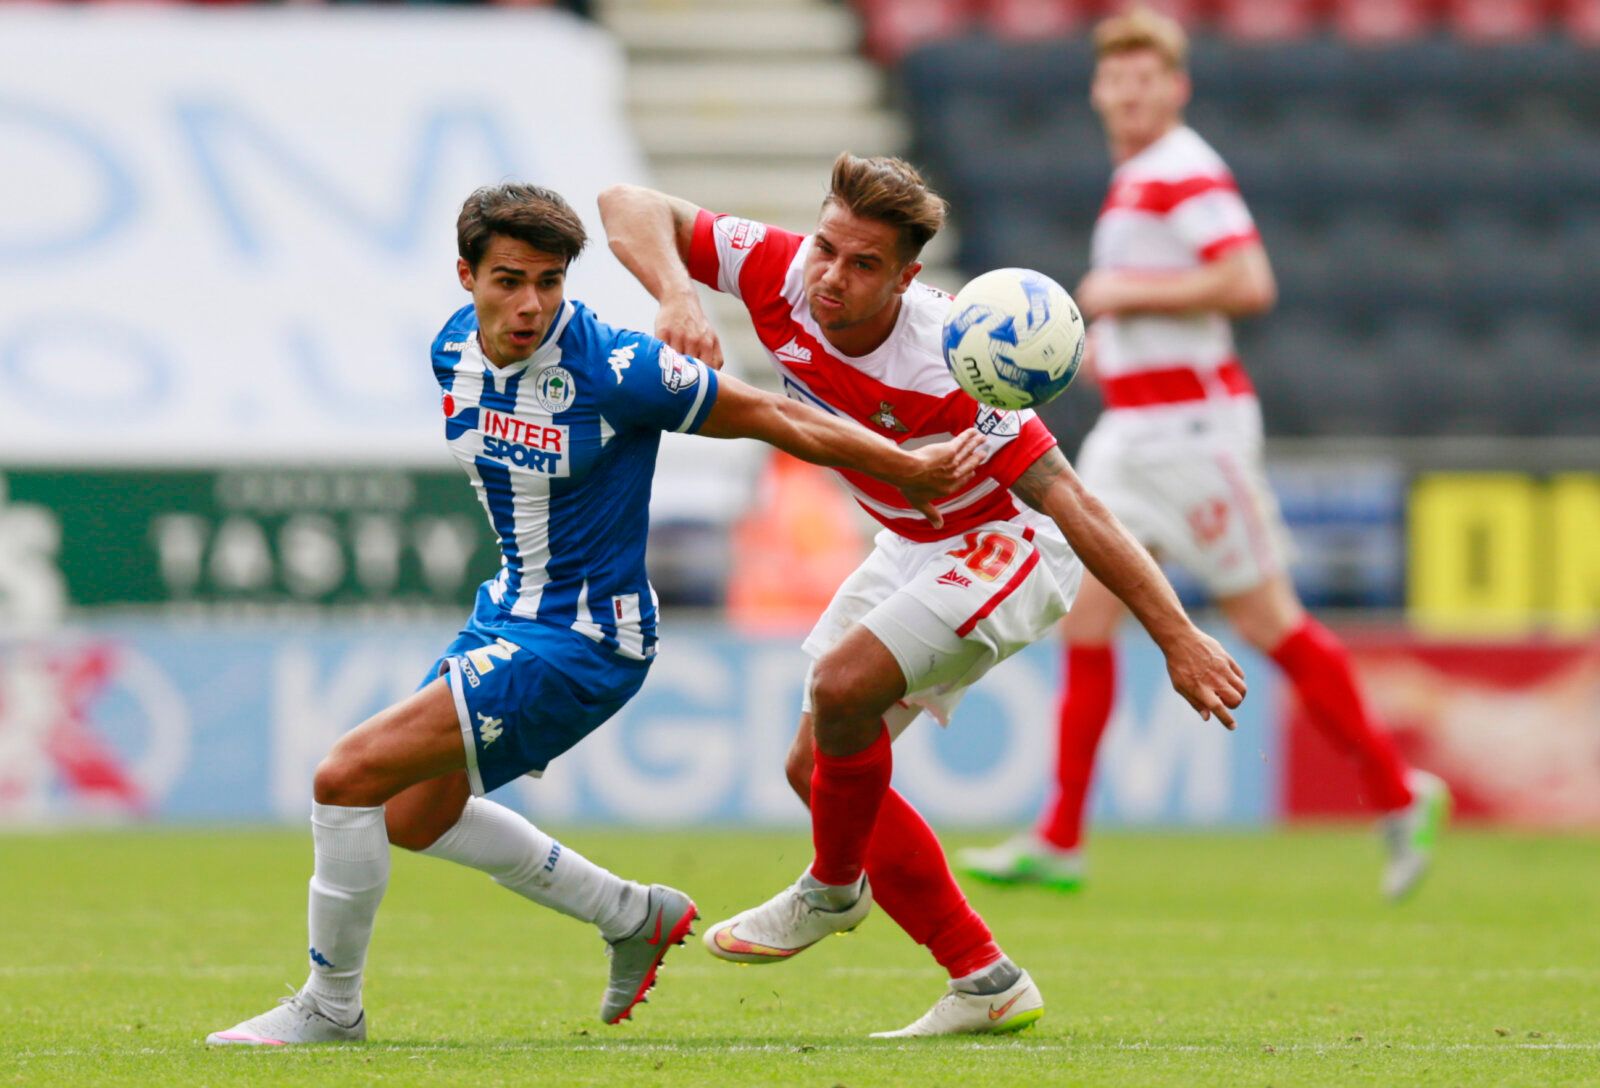 Football - Wigan Athletic v Doncaster Rovers - Sky Bet Football League One - DW Stadium - 16/8/15
Wigan Athletic's Reece James and Doncaster Rovers' Harry Forrester in action
Mandatory Credit: Action Images / Jason Cairnduff
Livepic
EDITORIAL USE ONLY. No use with unauthorized audio, video, data, fixture lists, club/league logos or 